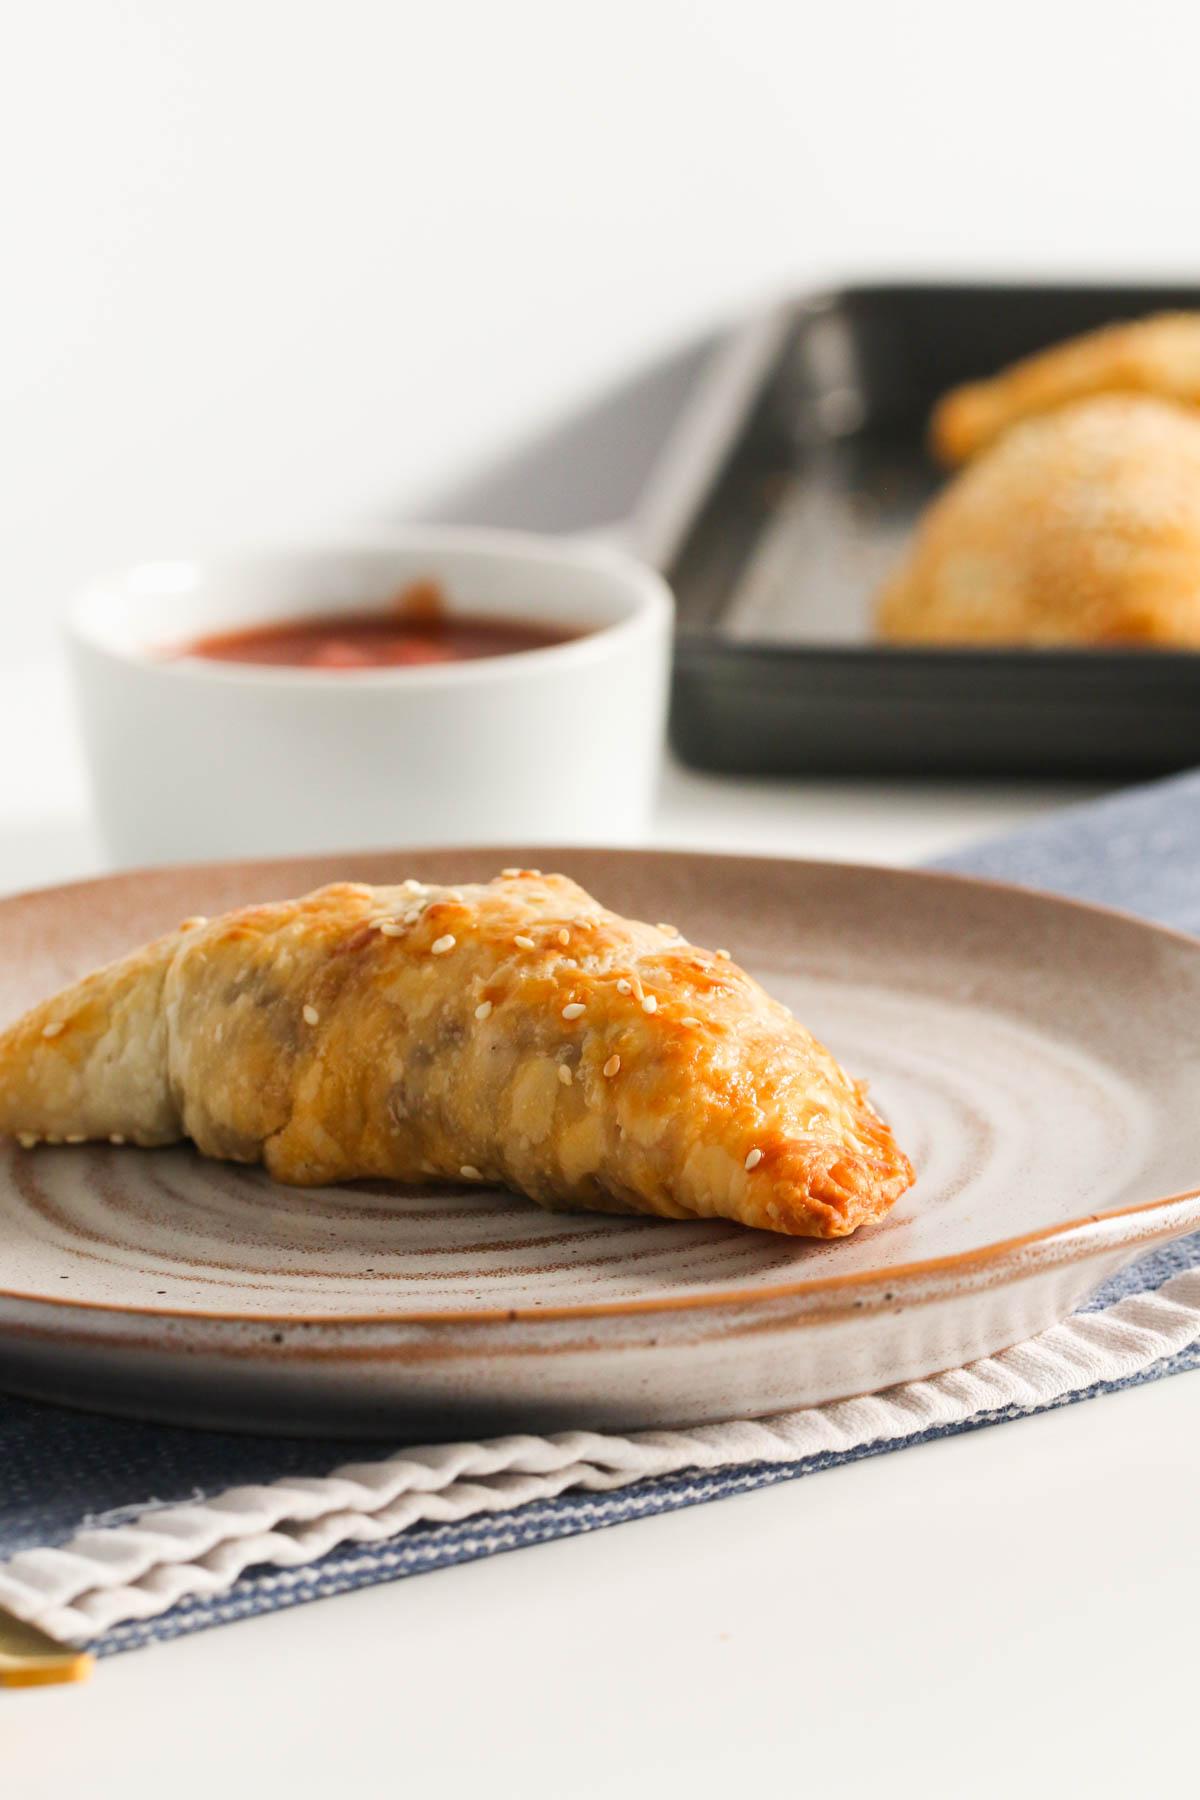 A single baked pastie on an earthenware plate with a ramekin of tomato sauce and more pasties in the blurred background